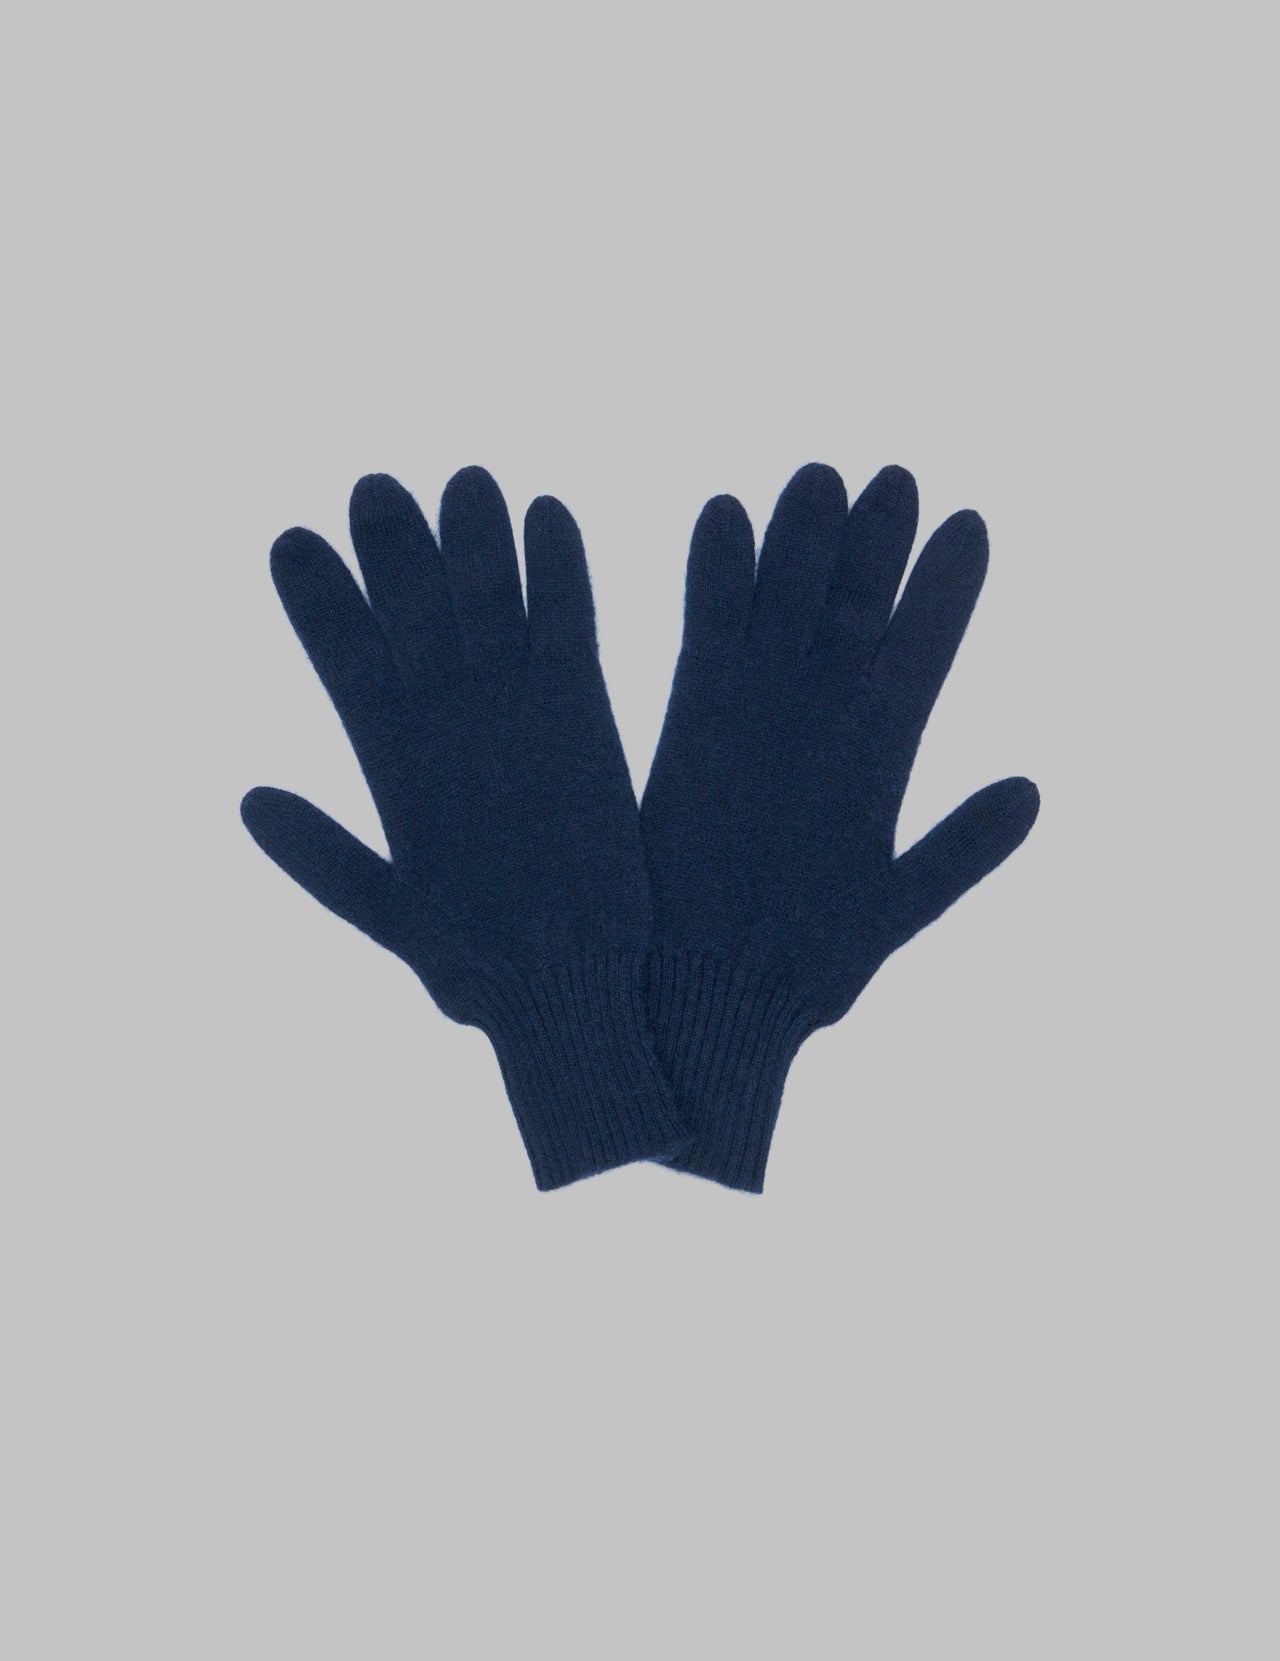  Navy Two Way Cashmere Gloves 